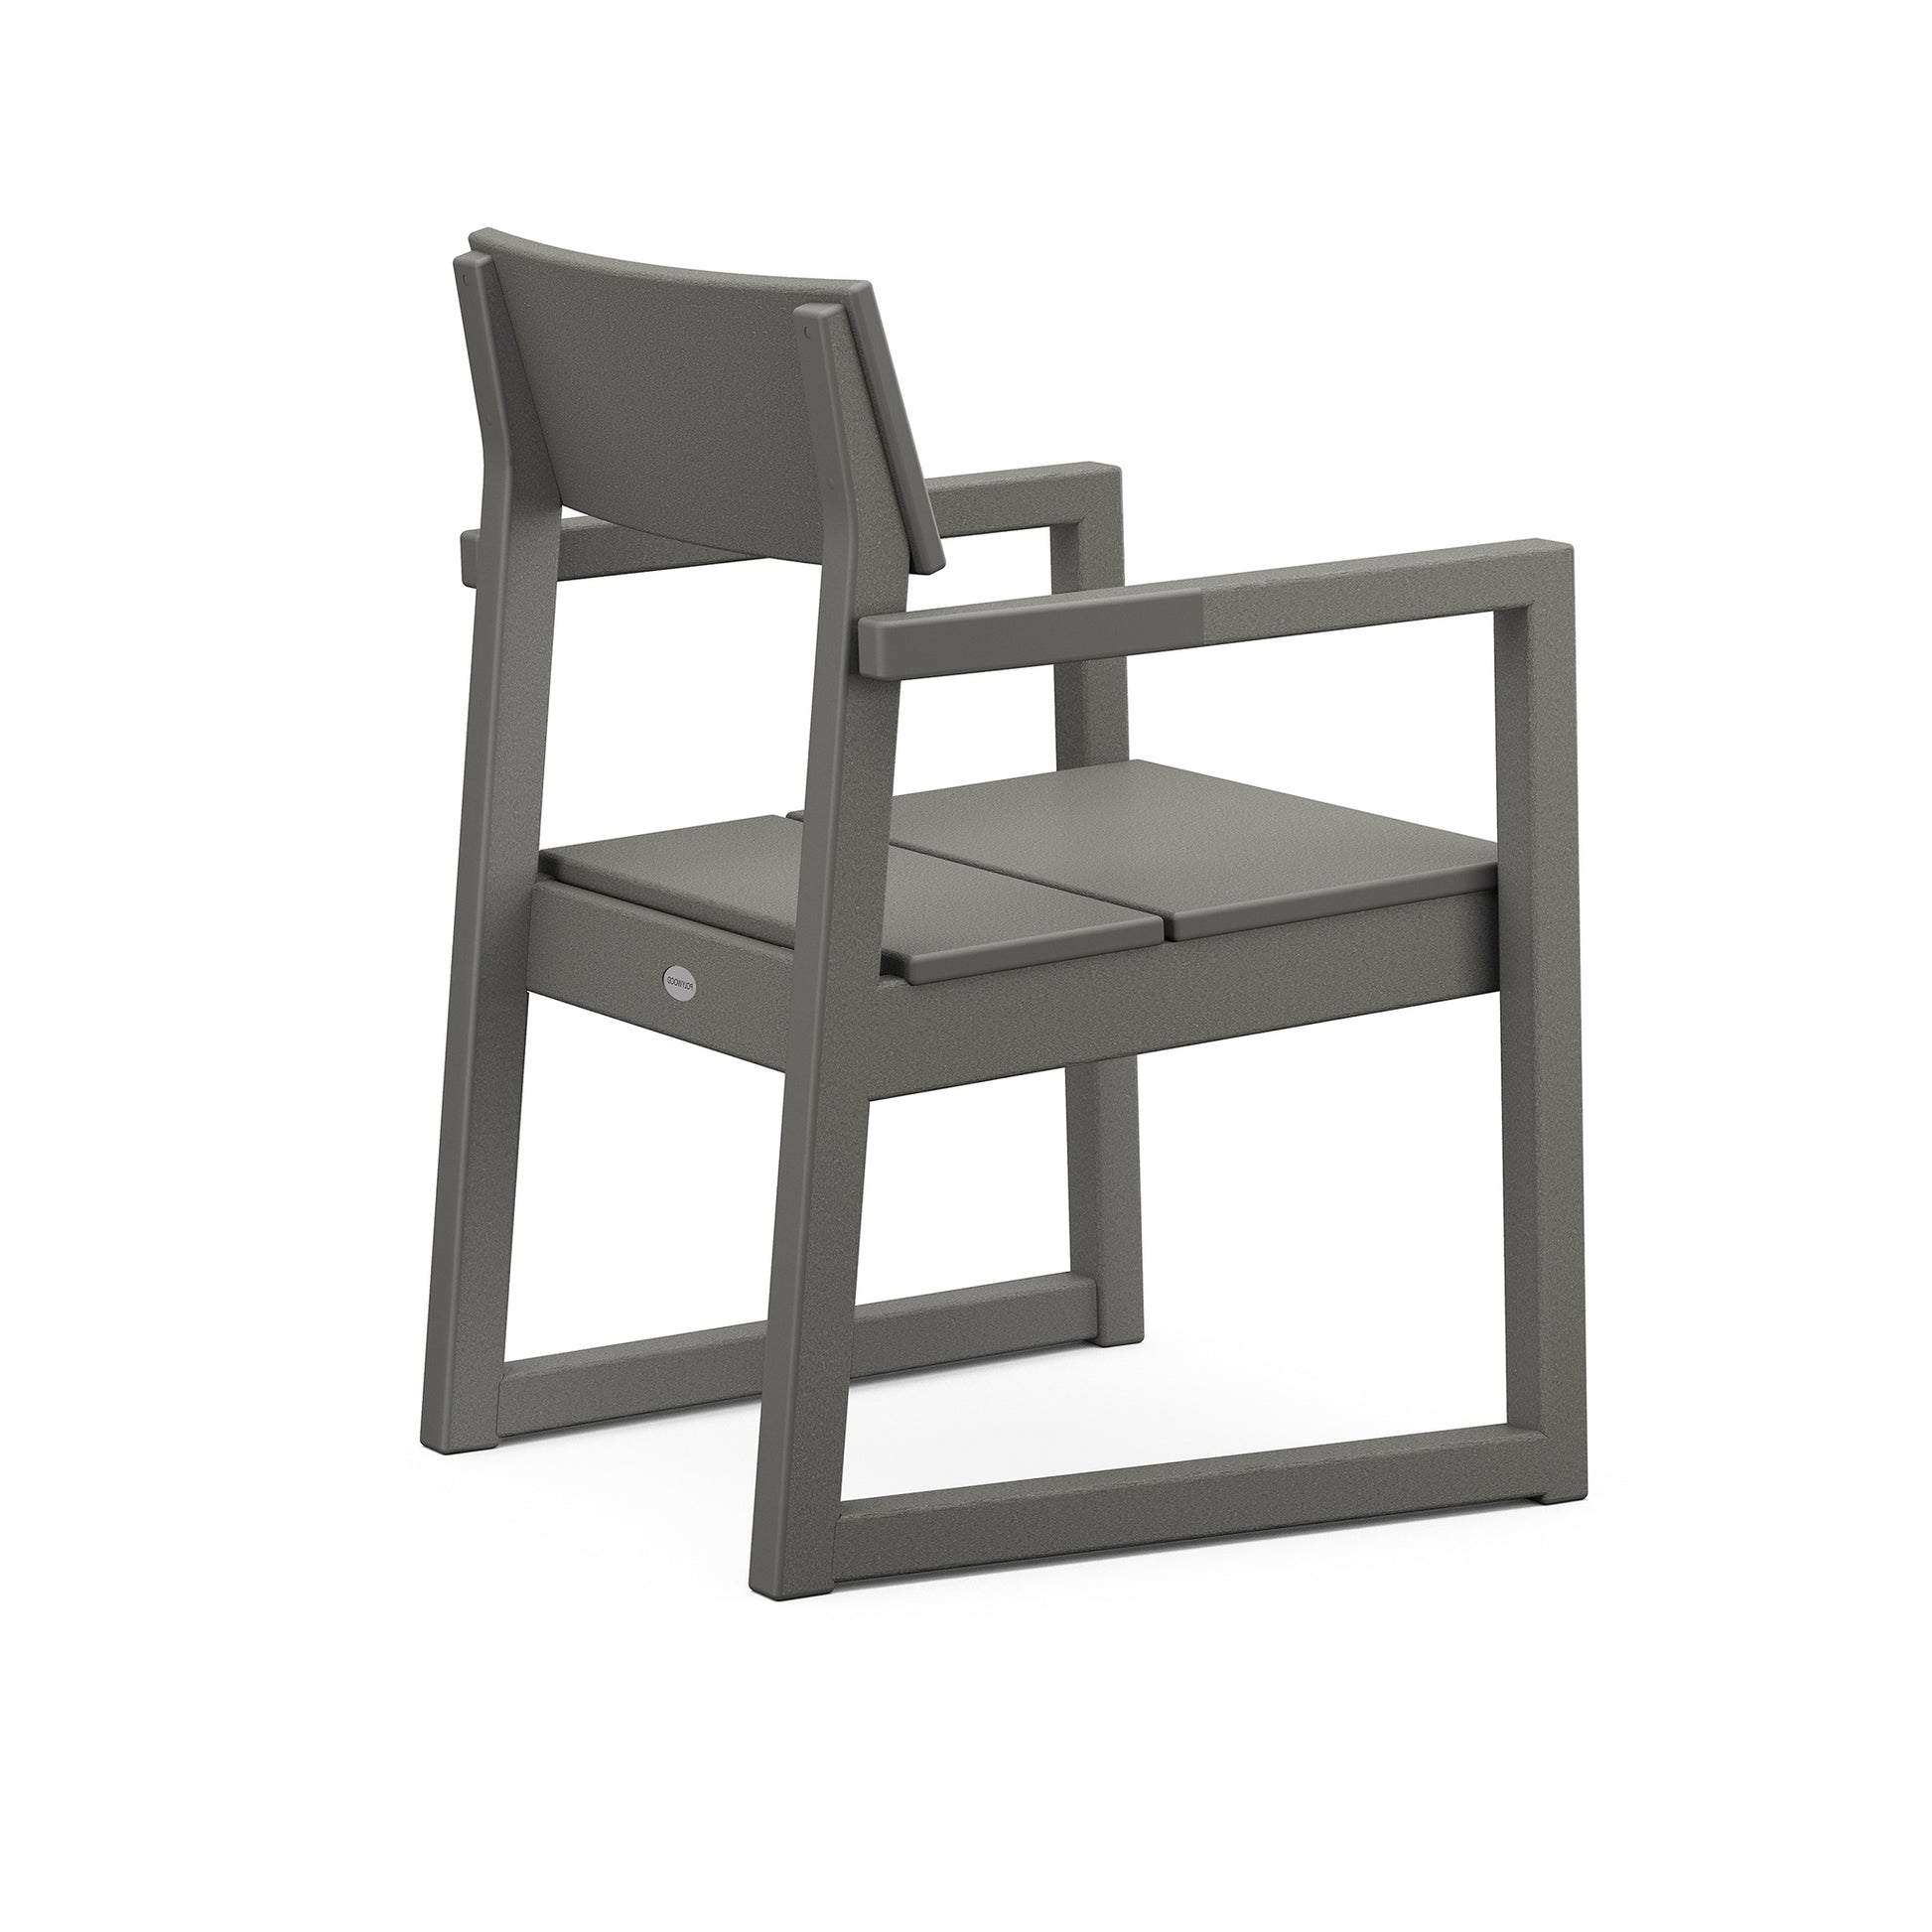 A modern gray outdoor dining chair made of POLYWOOD EDGE lumber, with a solid backrest and armrests, featuring a minimalist design and sturdy square legs, isolated on a white background.